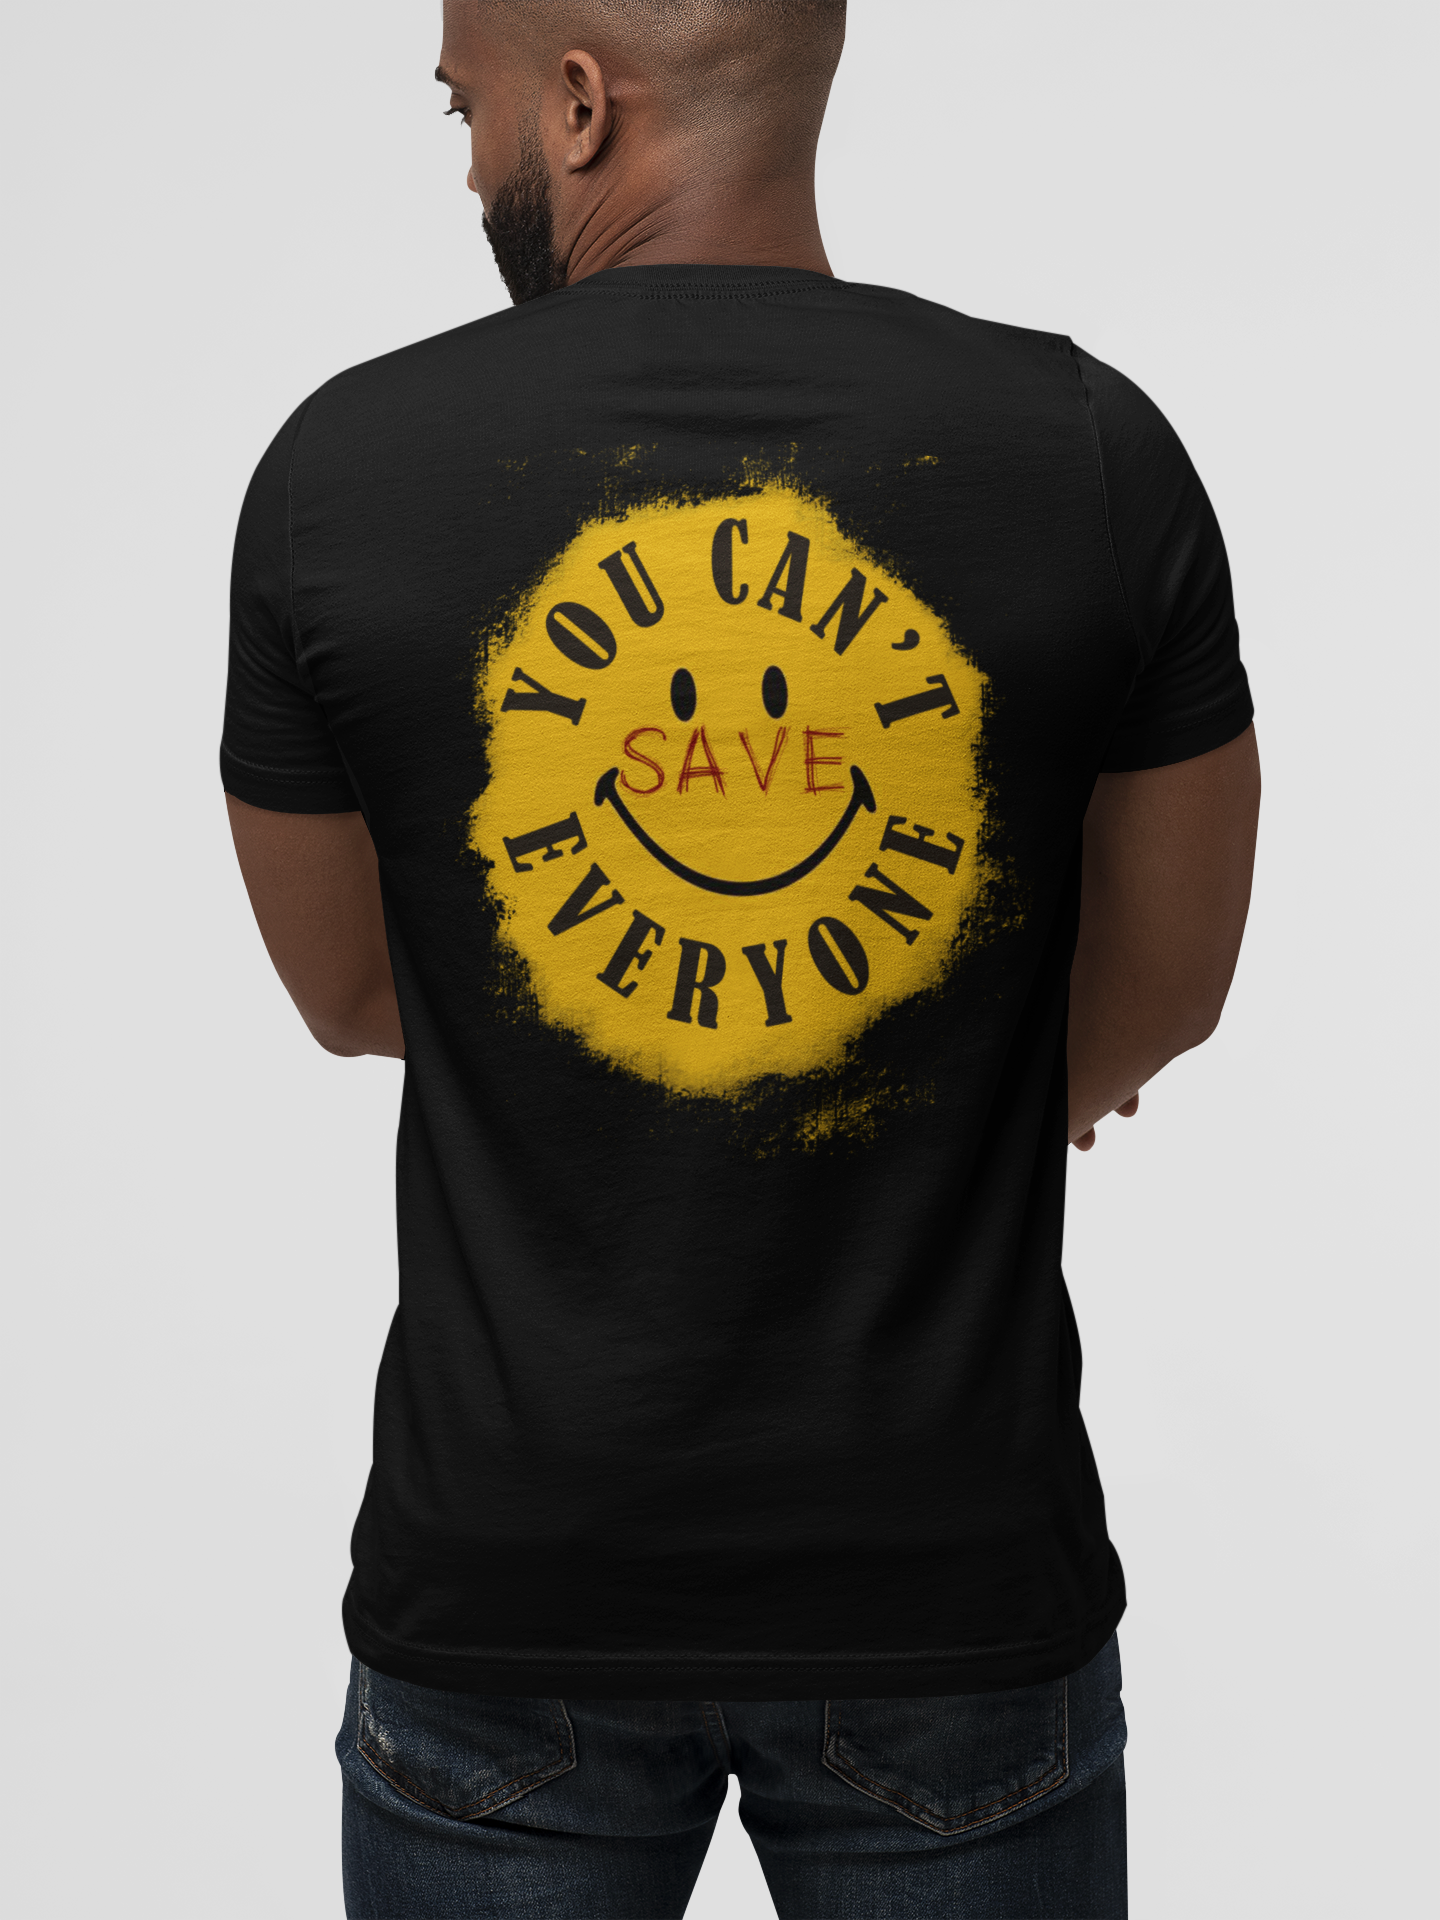 You Can't Save Everyone T Shirt